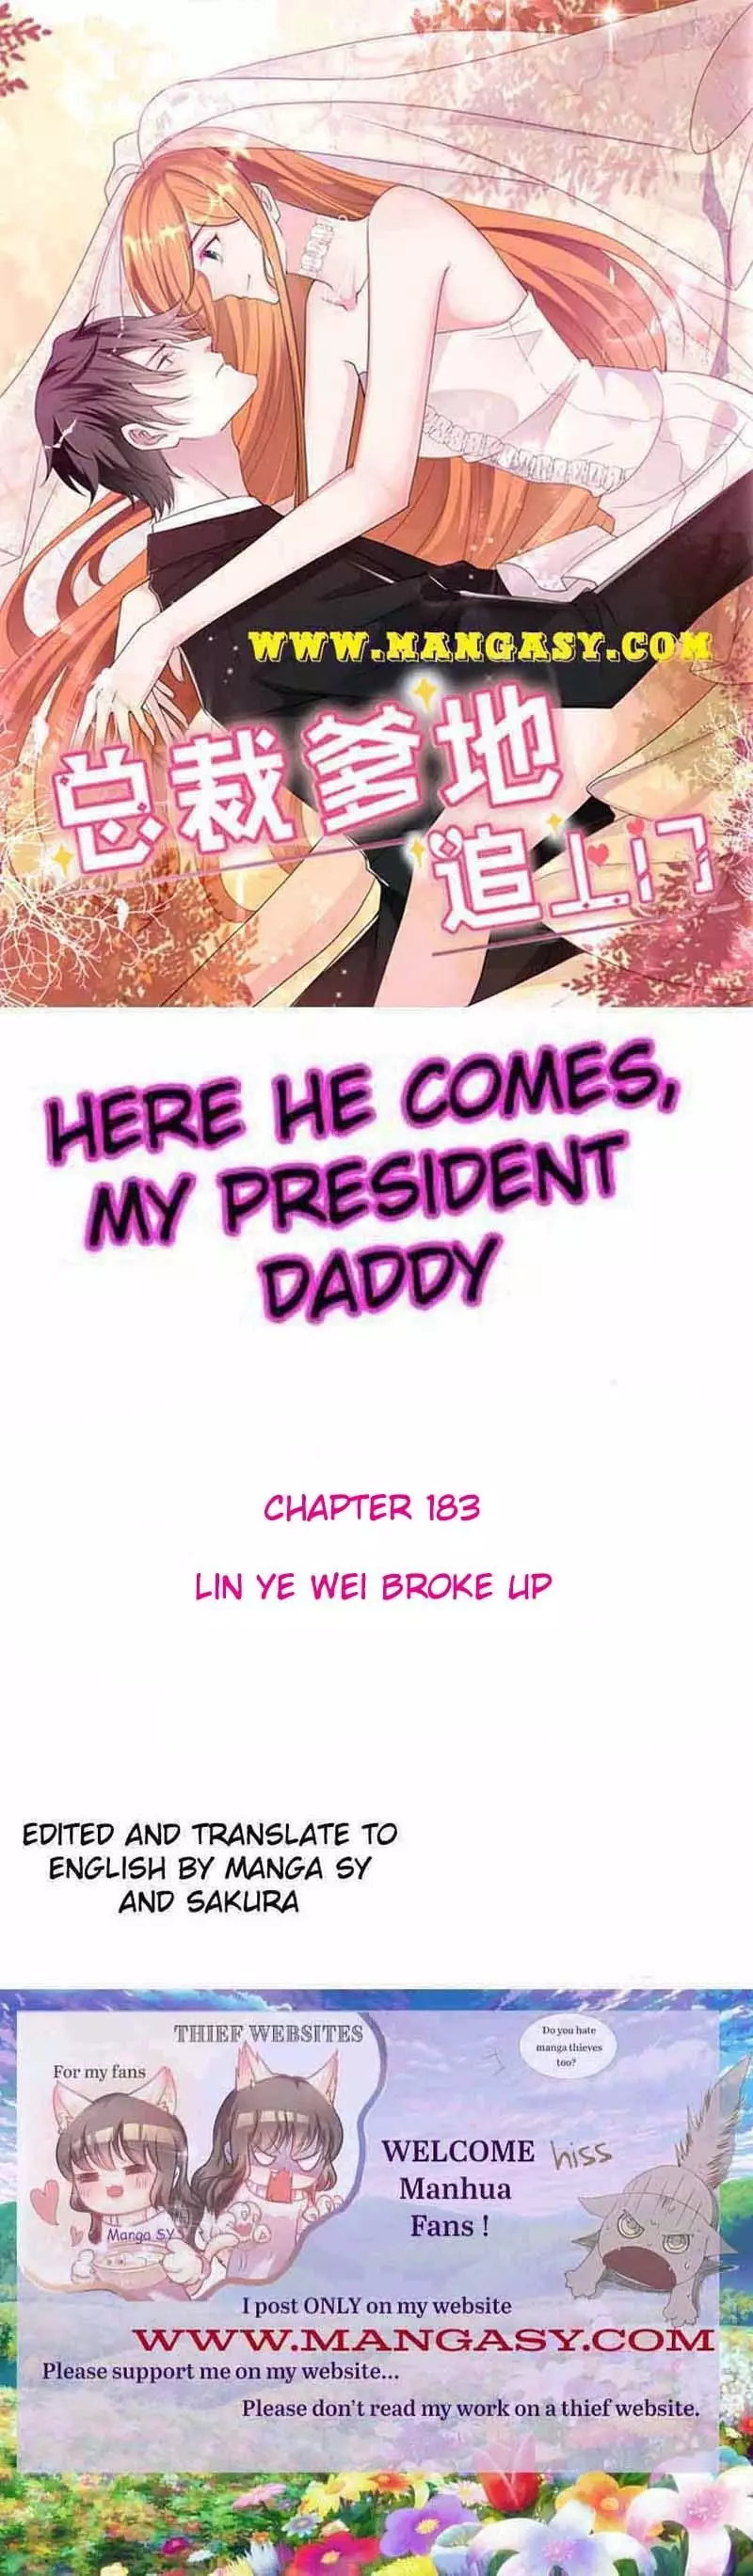 President Daddy Is Chasing You - 183 page 1-2b590fdc